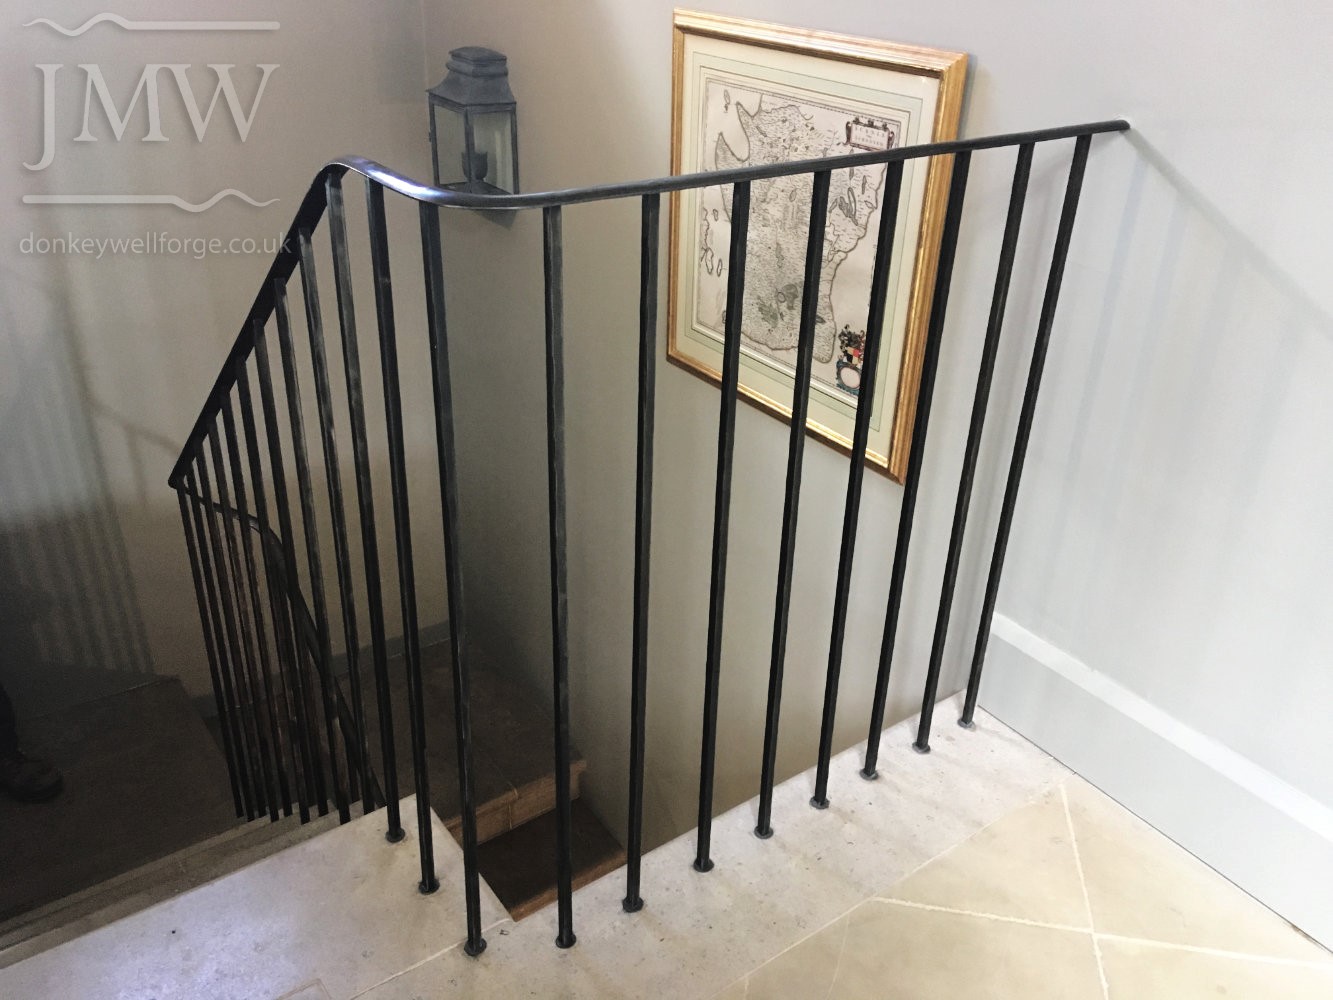 balustrades-stair-handrail-iron-country-house-riveted-forged